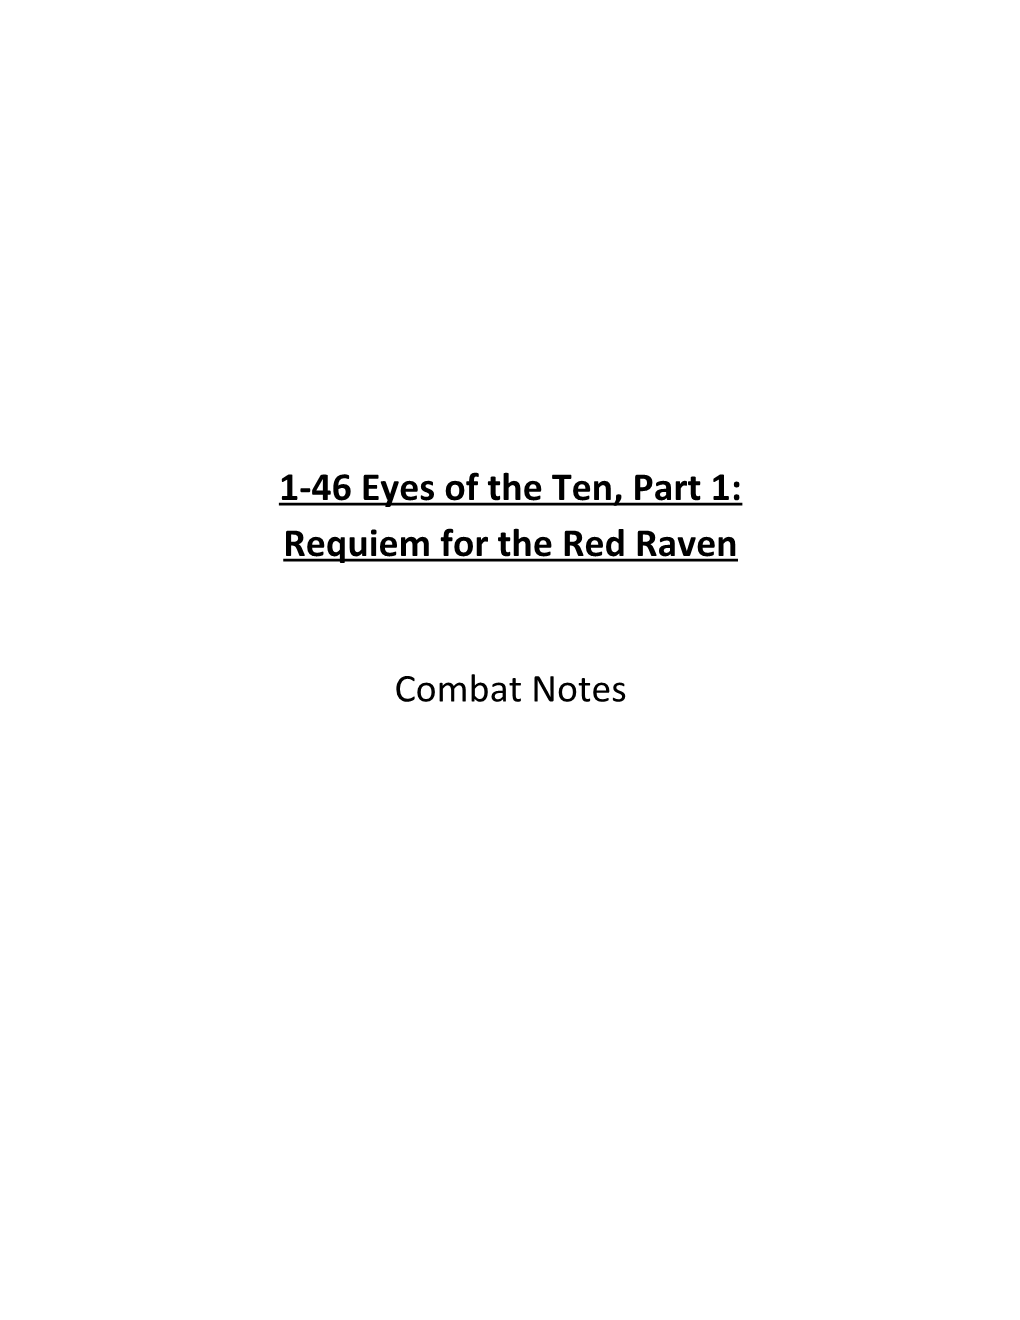 1-46 Eyes of the Ten, Part 1: Requiem for the Red Raven